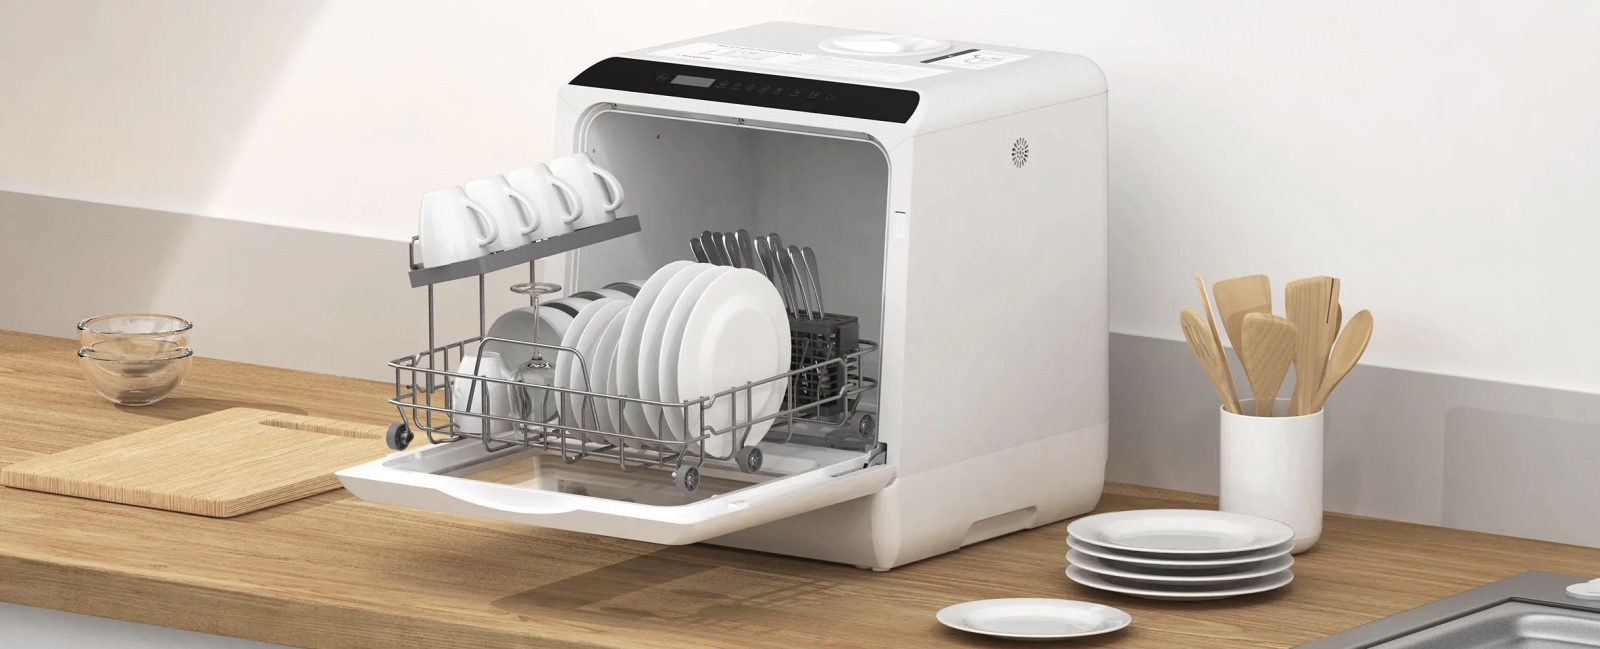 HAVA R01 Countertop Dishwasher Review